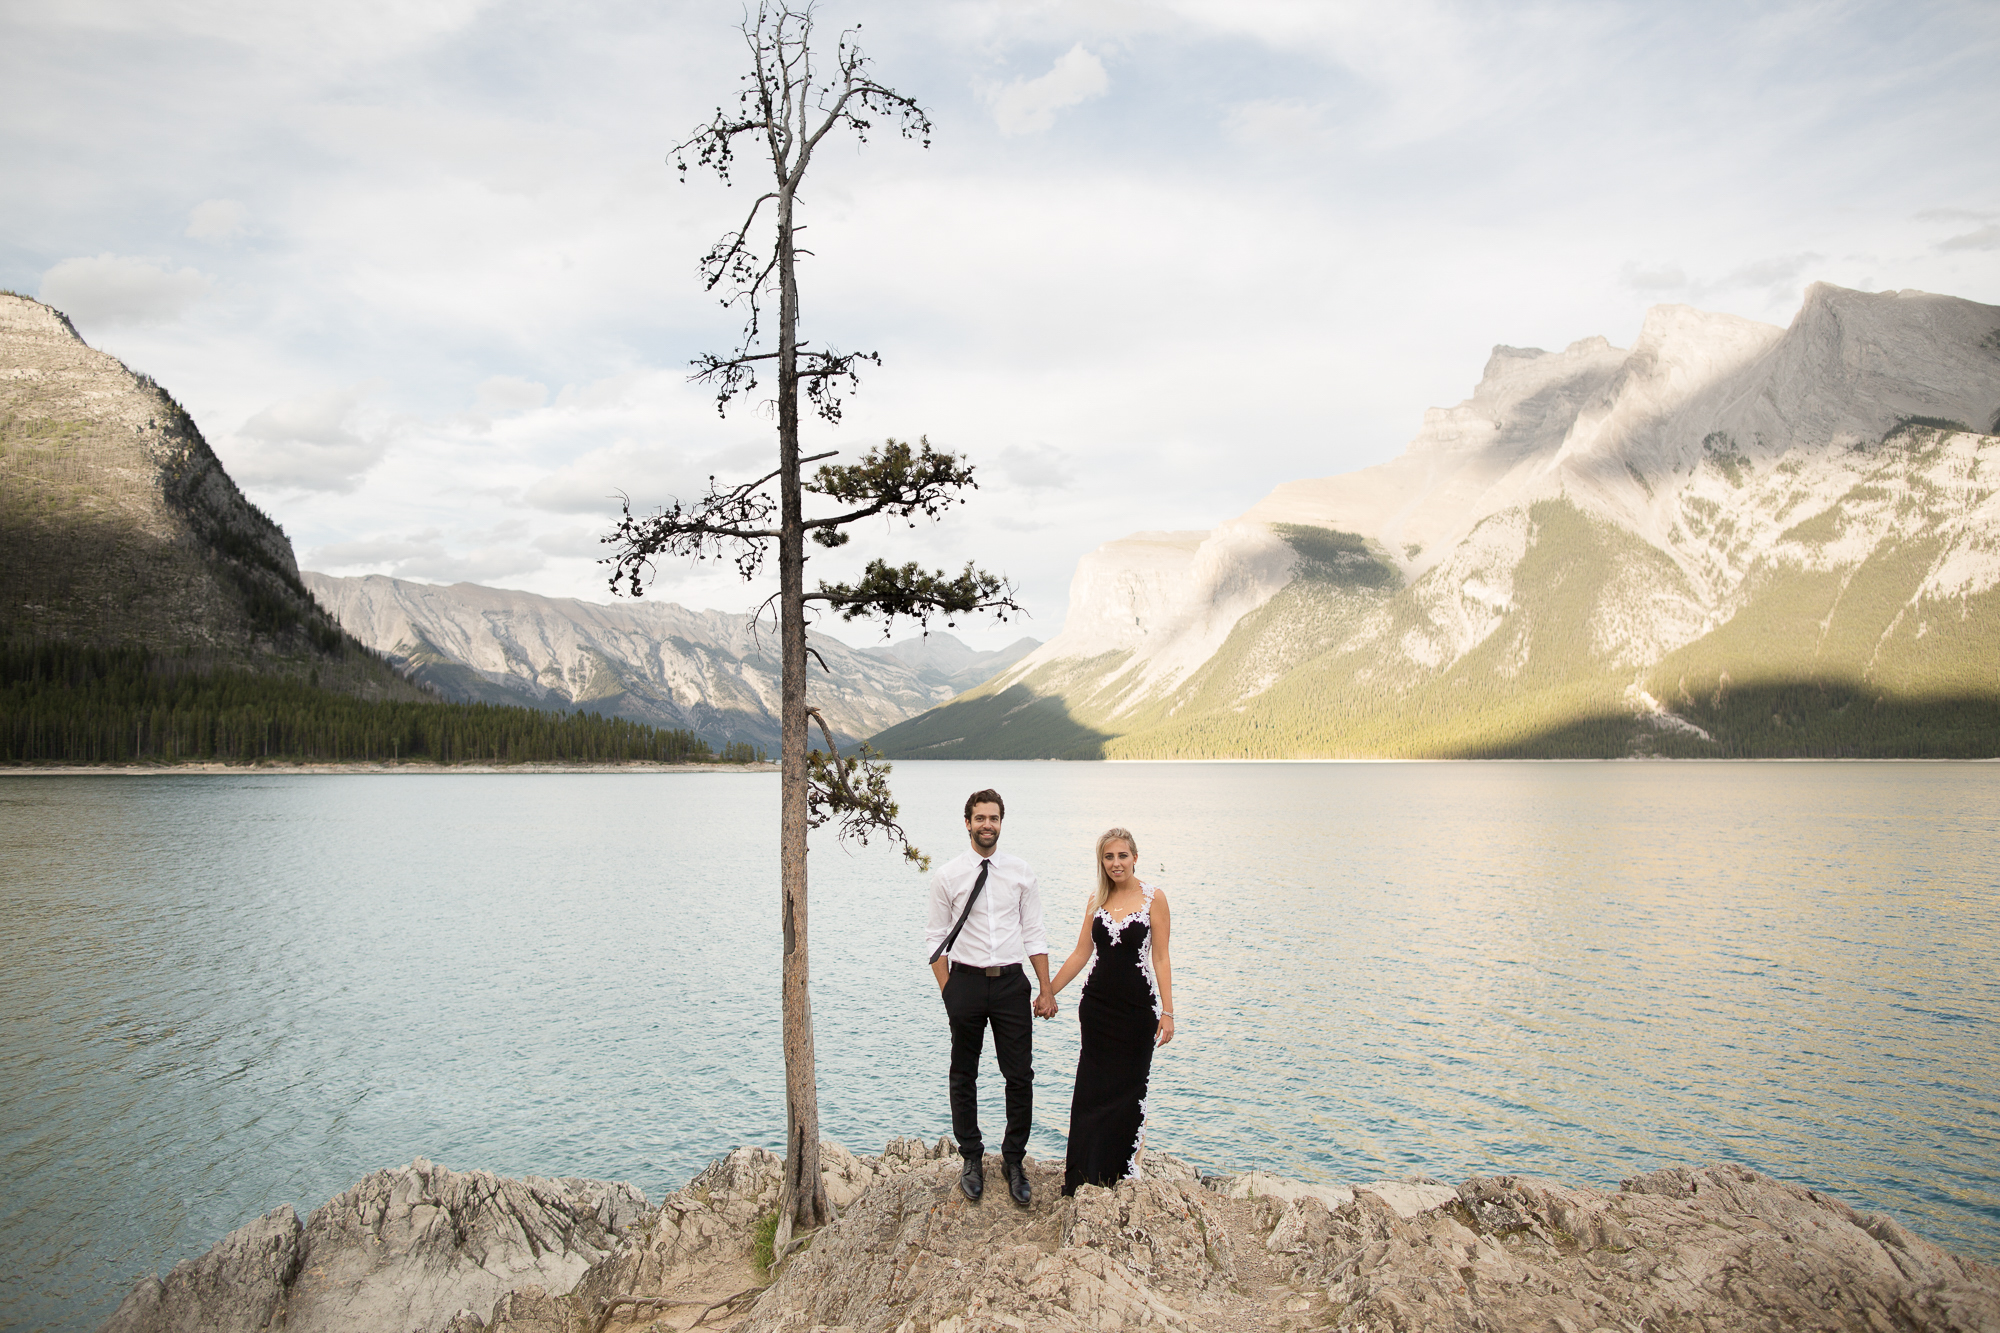 15-Willow_and_Wolf_Photography_Sandra_and_Shawn_Banff_Engagement132-Willow_and_Wolf_Photography_Sandra_and_Shawn_Engagement_Banff_BEC_8383